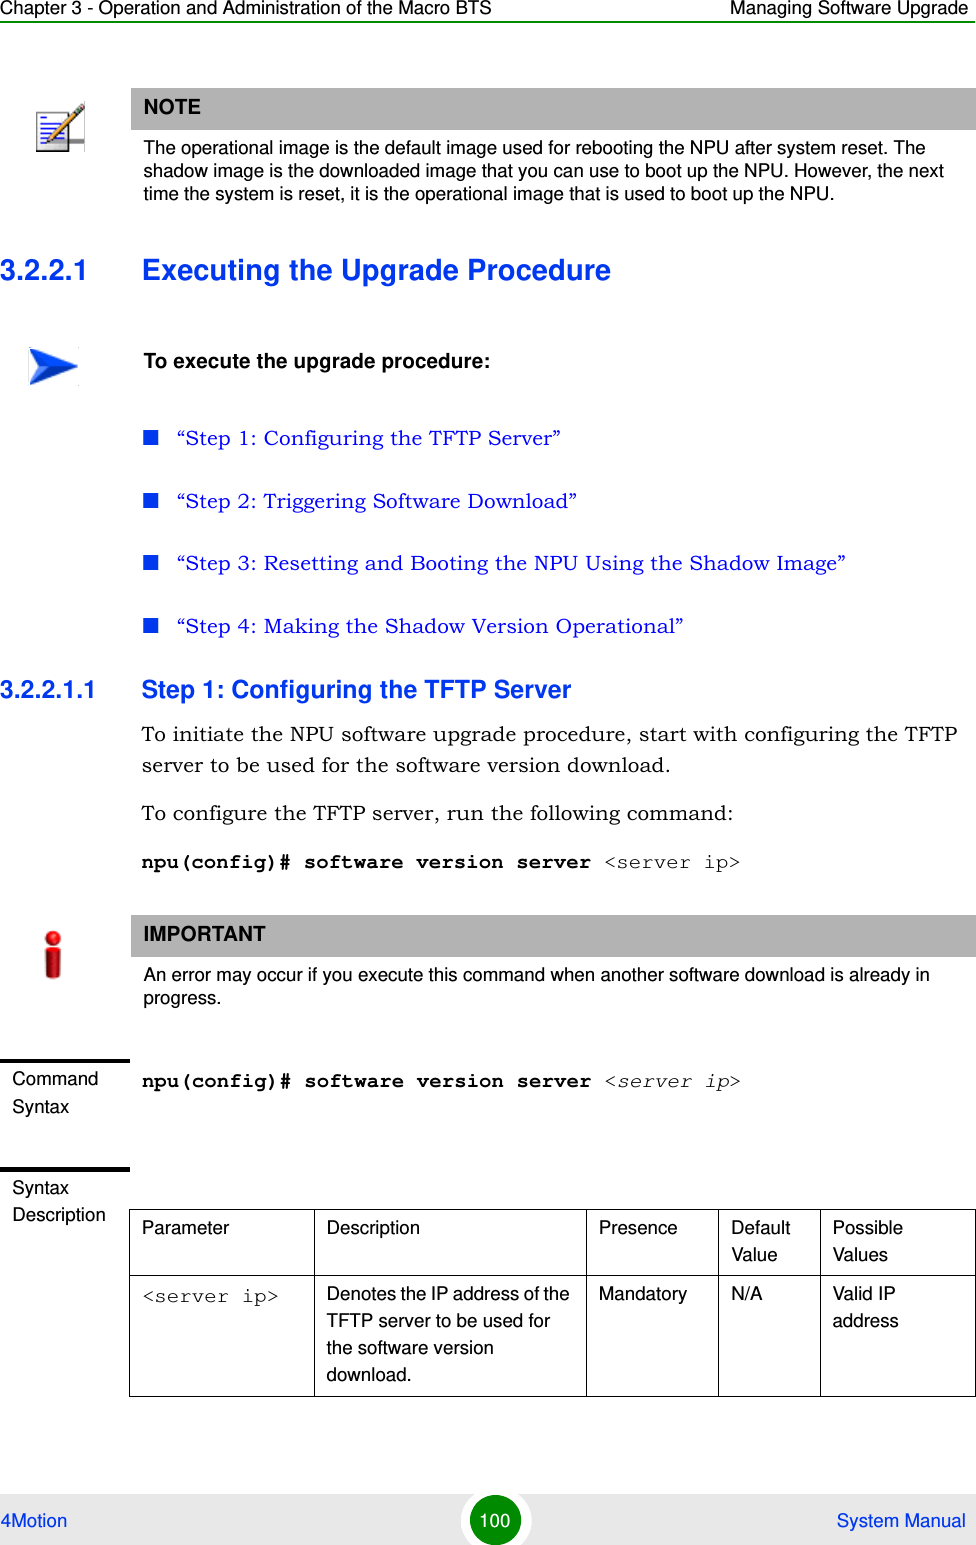 Chapter 3 - Operation and Administration of the Macro BTS Managing Software Upgrade4Motion 100  System Manual3.2.2.1 Executing the Upgrade Procedure“Step 1: Configuring the TFTP Server”“Step 2: Triggering Software Download”“Step 3: Resetting and Booting the NPU Using the Shadow Image”“Step 4: Making the Shadow Version Operational”3.2.2.1.1 Step 1: Configuring the TFTP ServerTo initiate the NPU software upgrade procedure, start with configuring the TFTP server to be used for the software version download. To configure the TFTP server, run the following command:npu(config)# software version server &lt;server ip&gt;NOTEThe operational image is the default image used for rebooting the NPU after system reset. The shadow image is the downloaded image that you can use to boot up the NPU. However, the next time the system is reset, it is the operational image that is used to boot up the NPU.To execute the upgrade procedure:IMPORTANTAn error may occur if you execute this command when another software download is already in progress.Command Syntaxnpu(config)# software version server &lt;server ip&gt;Syntax Description Parameter Description Presence Default ValuePossible Values&lt;server ip&gt; Denotes the IP address of the TFTP server to be used for the software version download.Mandatory N/A Valid IP address